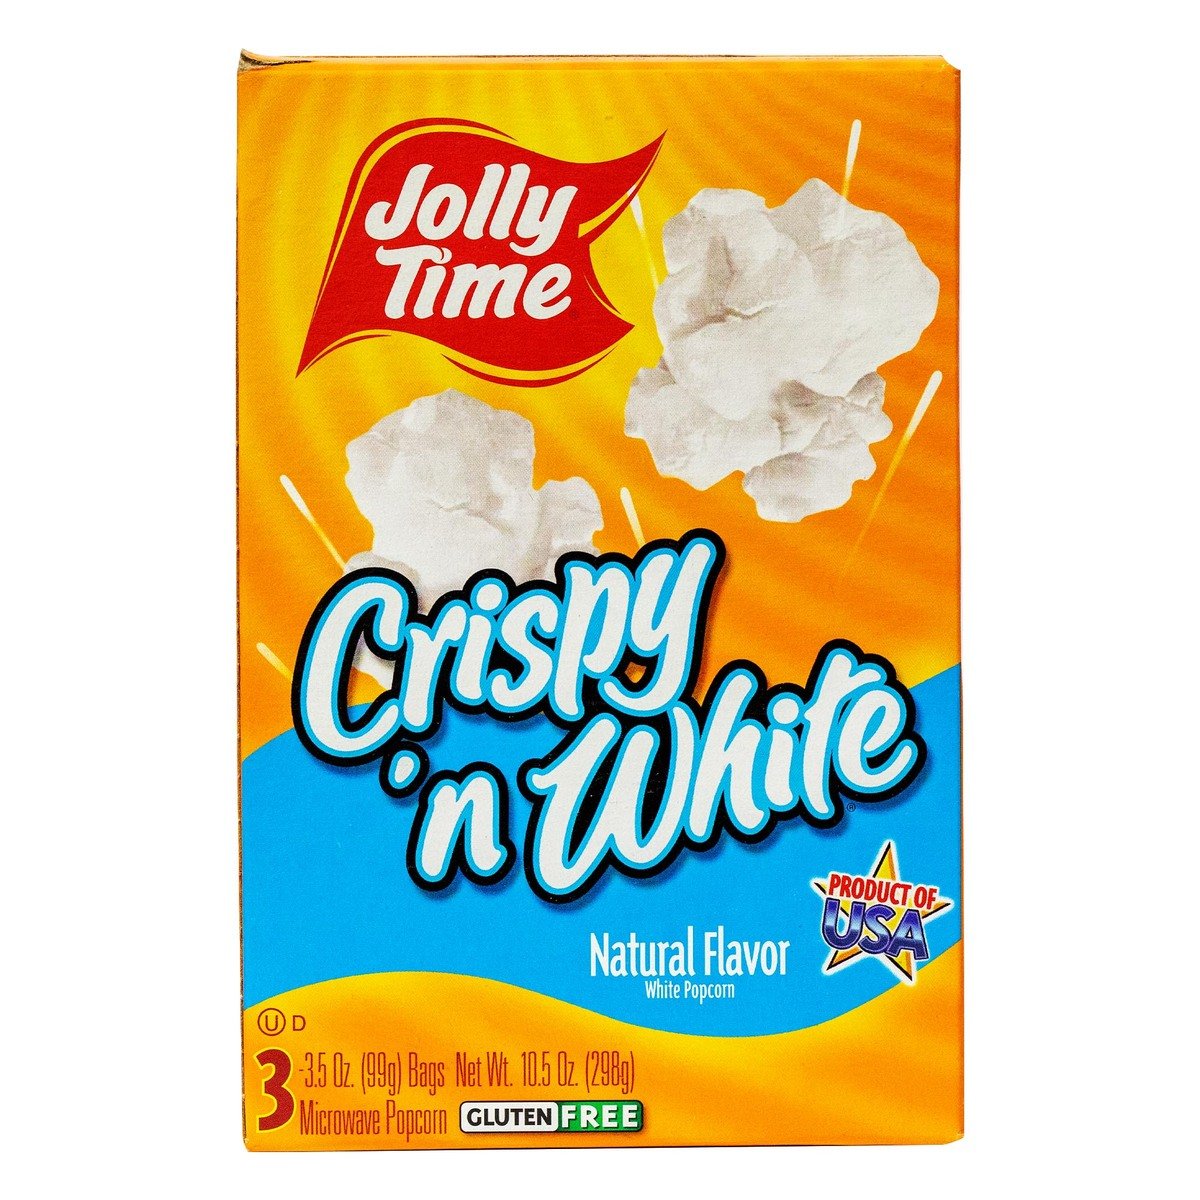 Jolly Time Crispy 'n White Microwave Natural Flavour Popcorn 99g